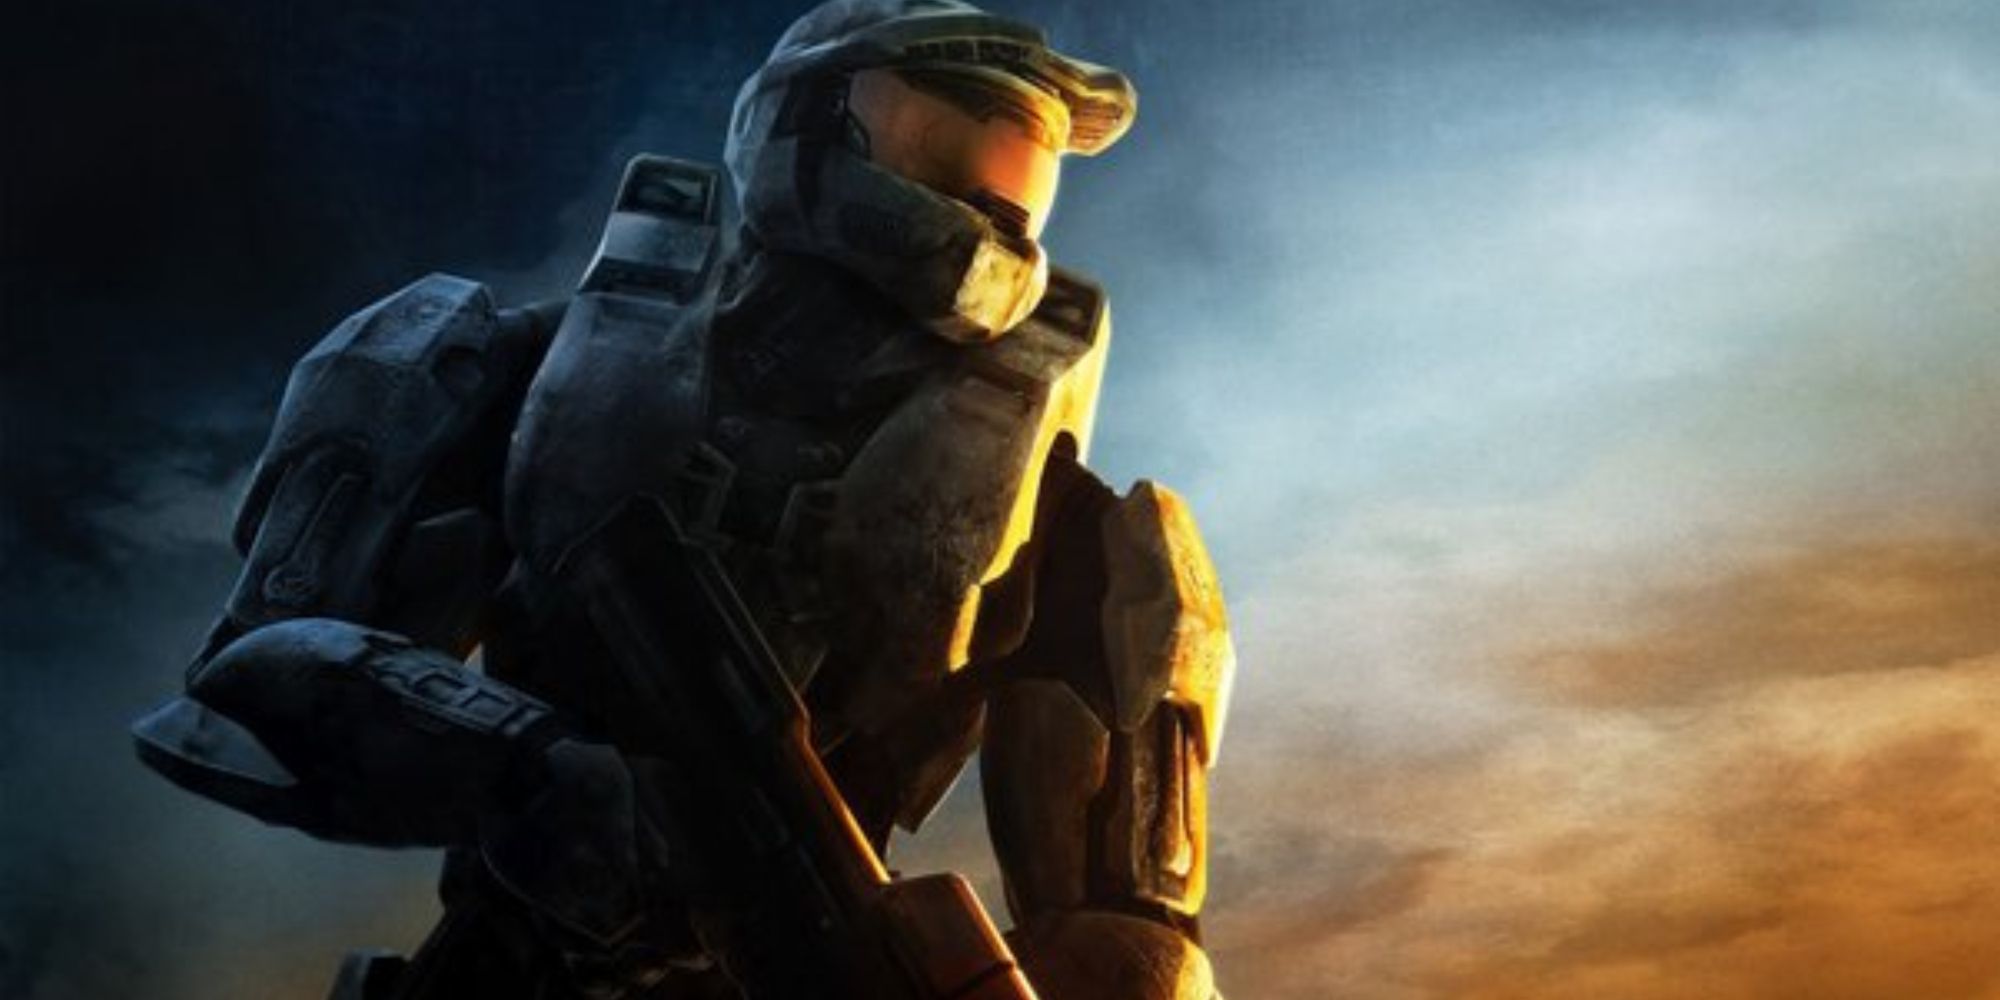 Master Chief with gun against the sky